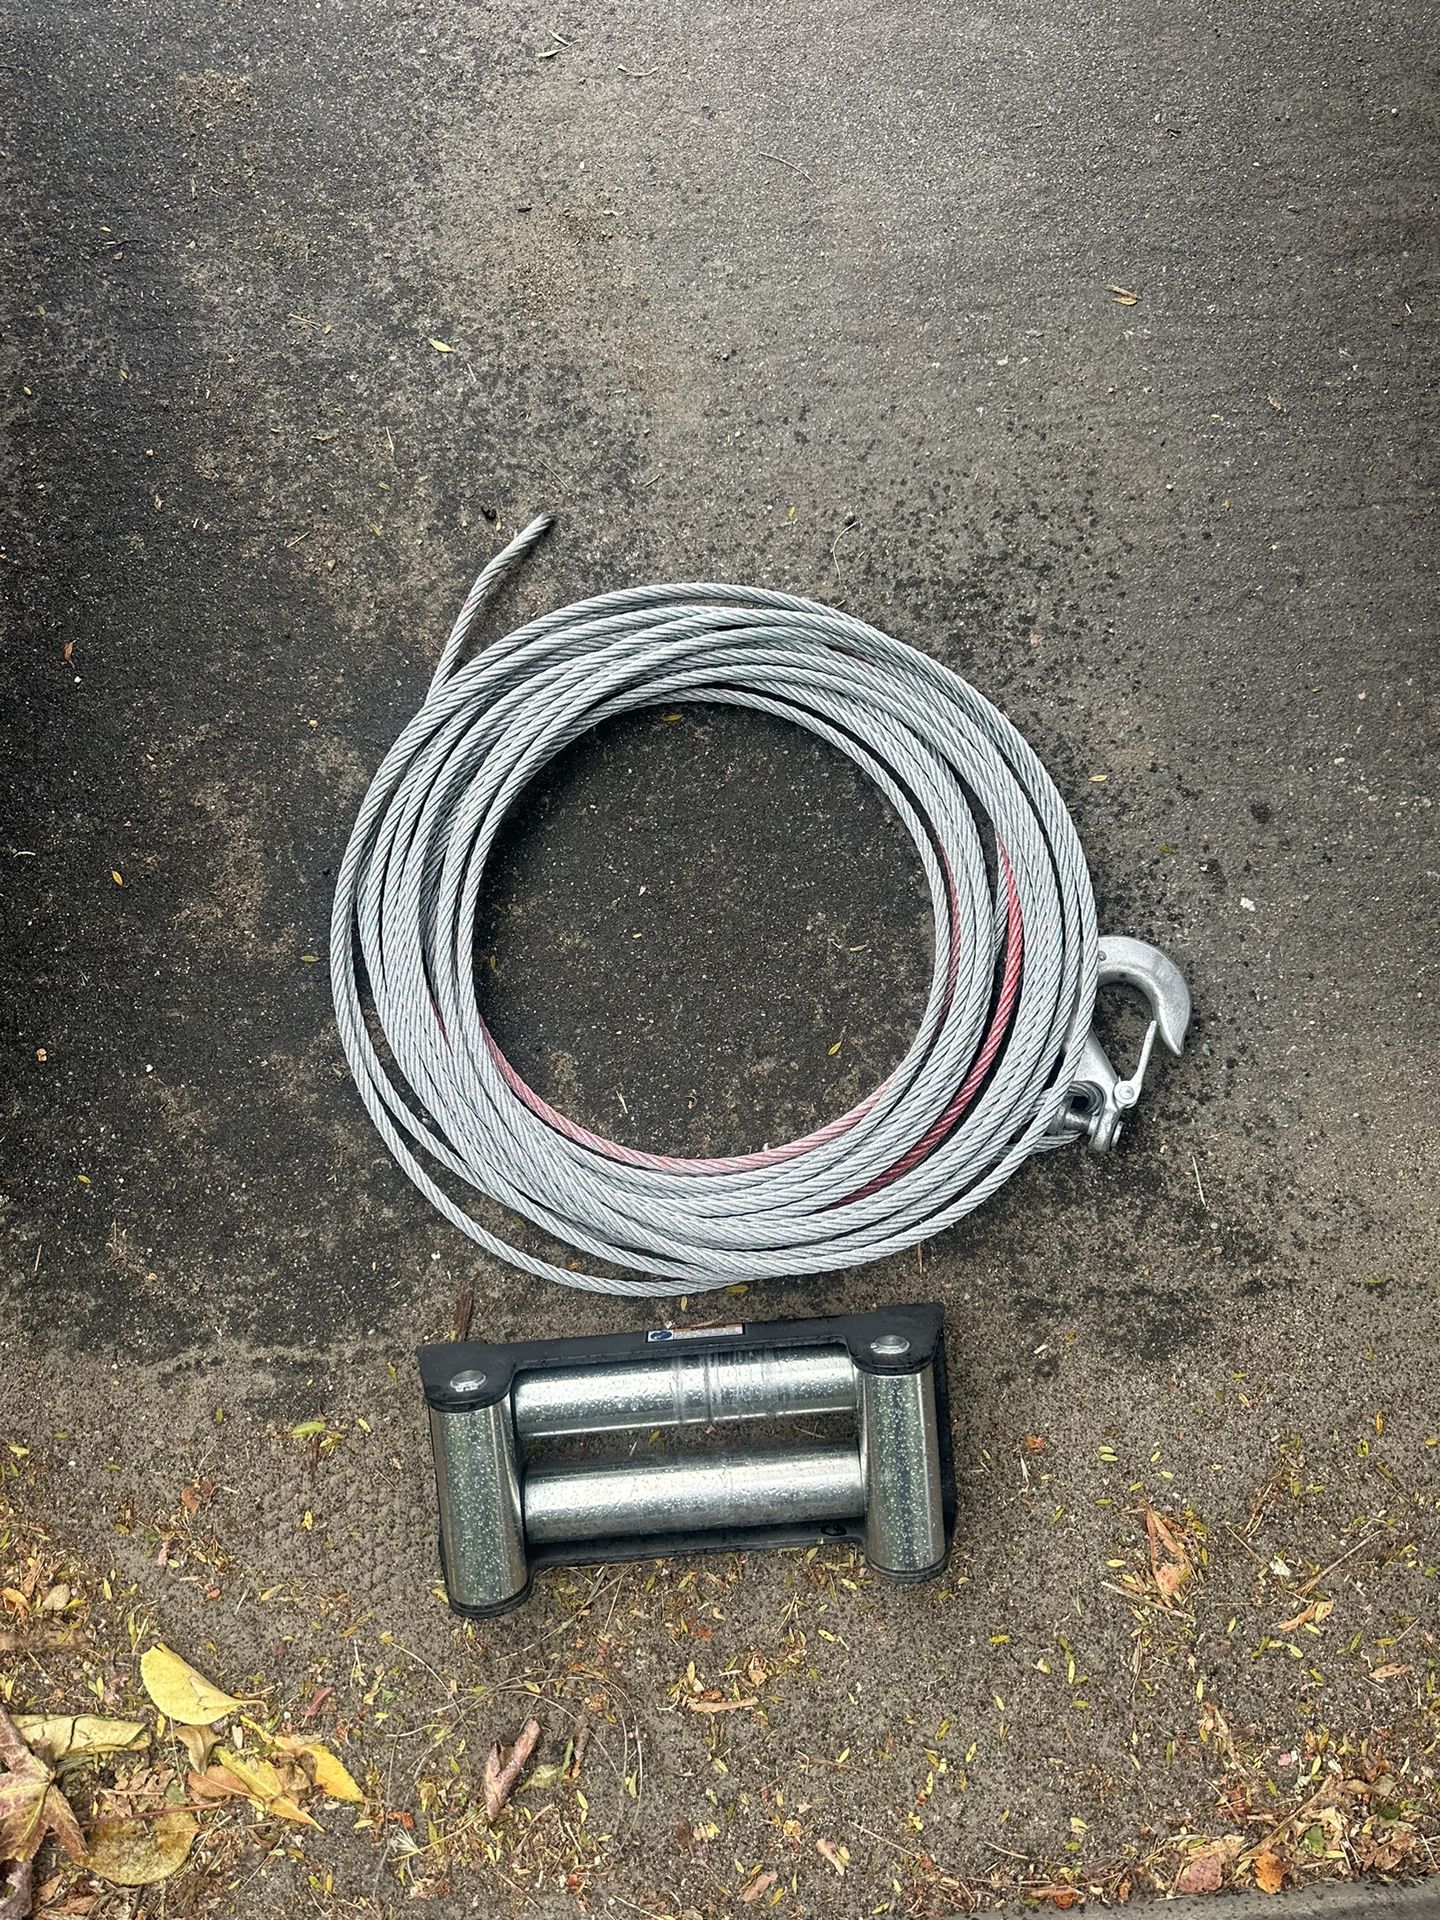 Winch Cable With Hawser